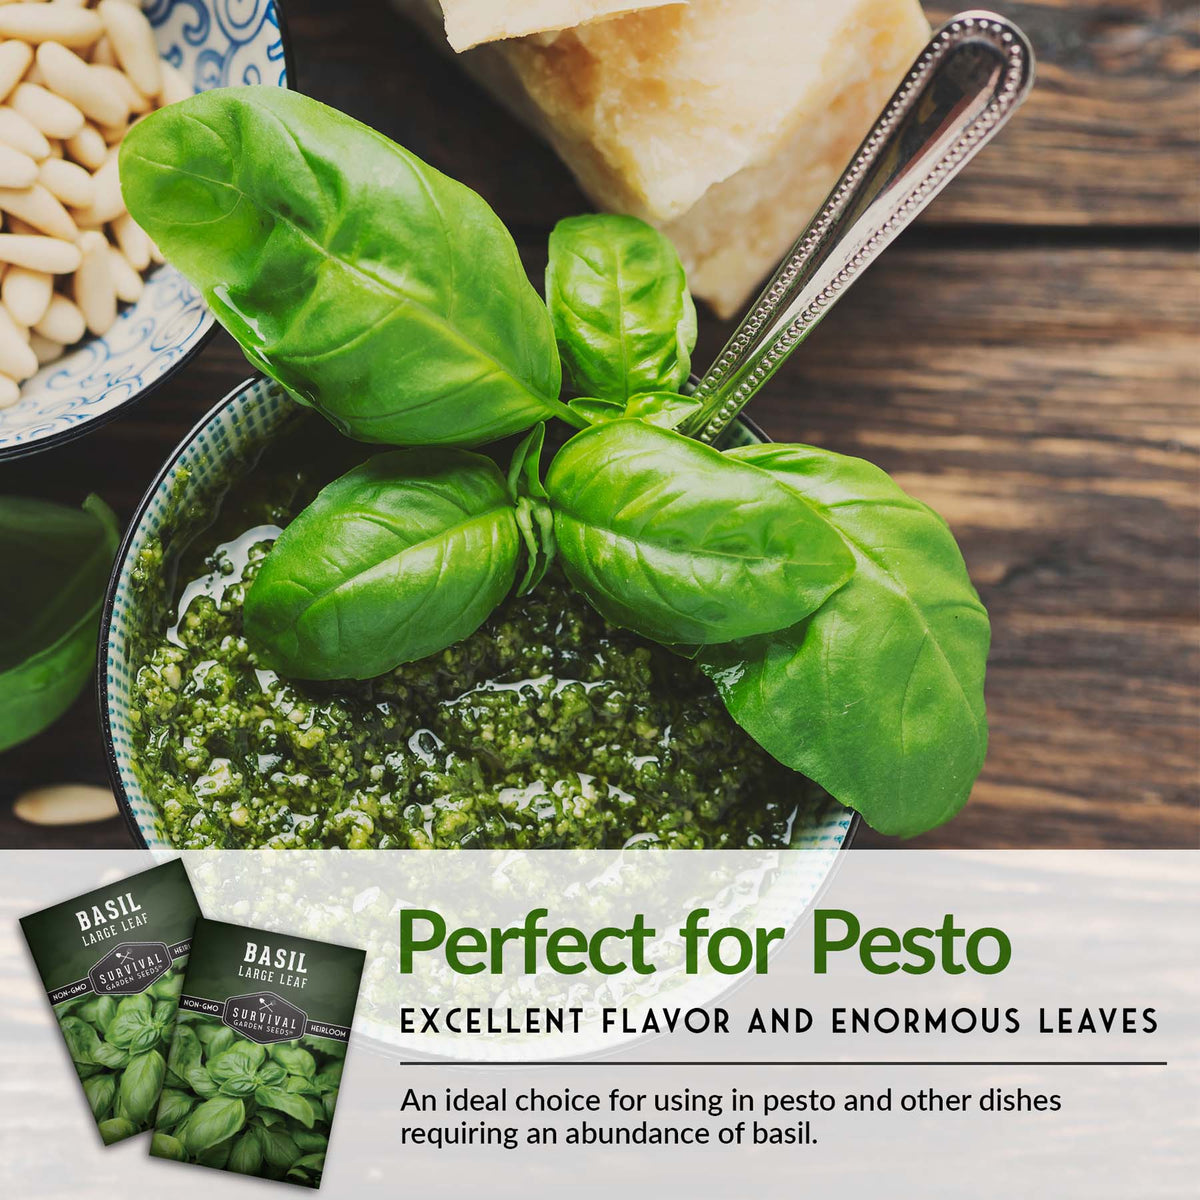 Large Leaf basil is perfect for pesto